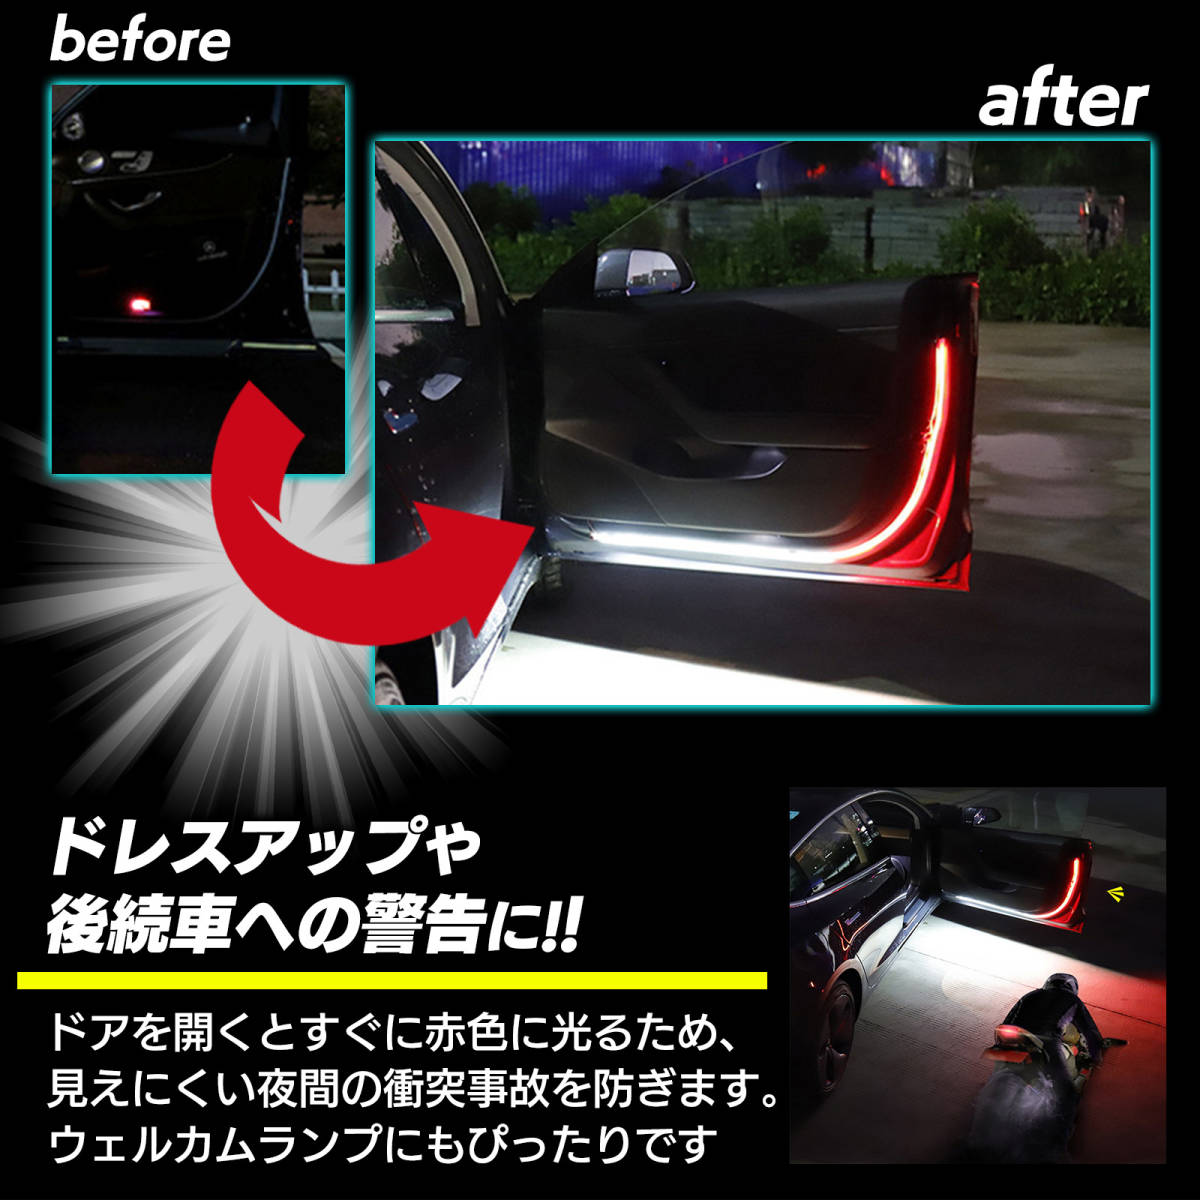 LED tape light do Ad Alain p 2 ps foot lamp car warning light strobo sequential current . clashing rear impact collision prevention car tesi underfoot lighting 